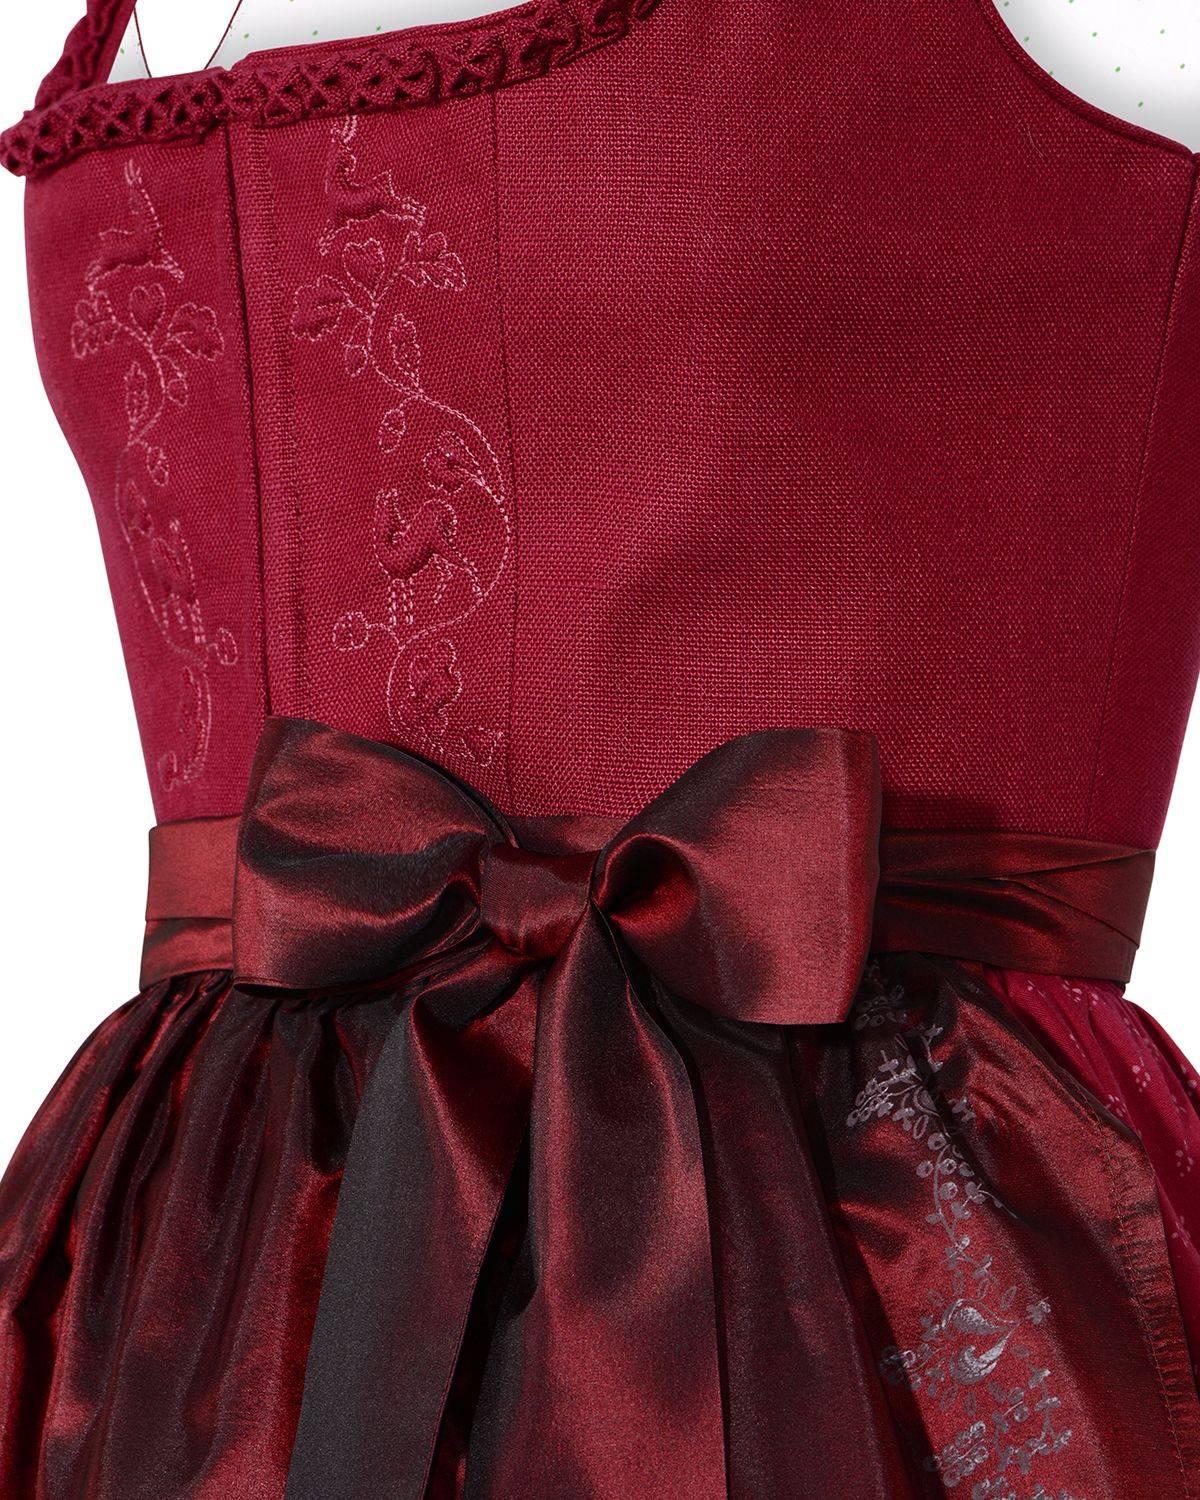 According to the New York Times, 'the dirndl is the new fashion must-have.' US Vogue has described it as 'the most flattering dress a woman can wear.'

I am delighted, therefore to offer this wonderful burgundy dirndl dress by Lodenfrey of Munich,